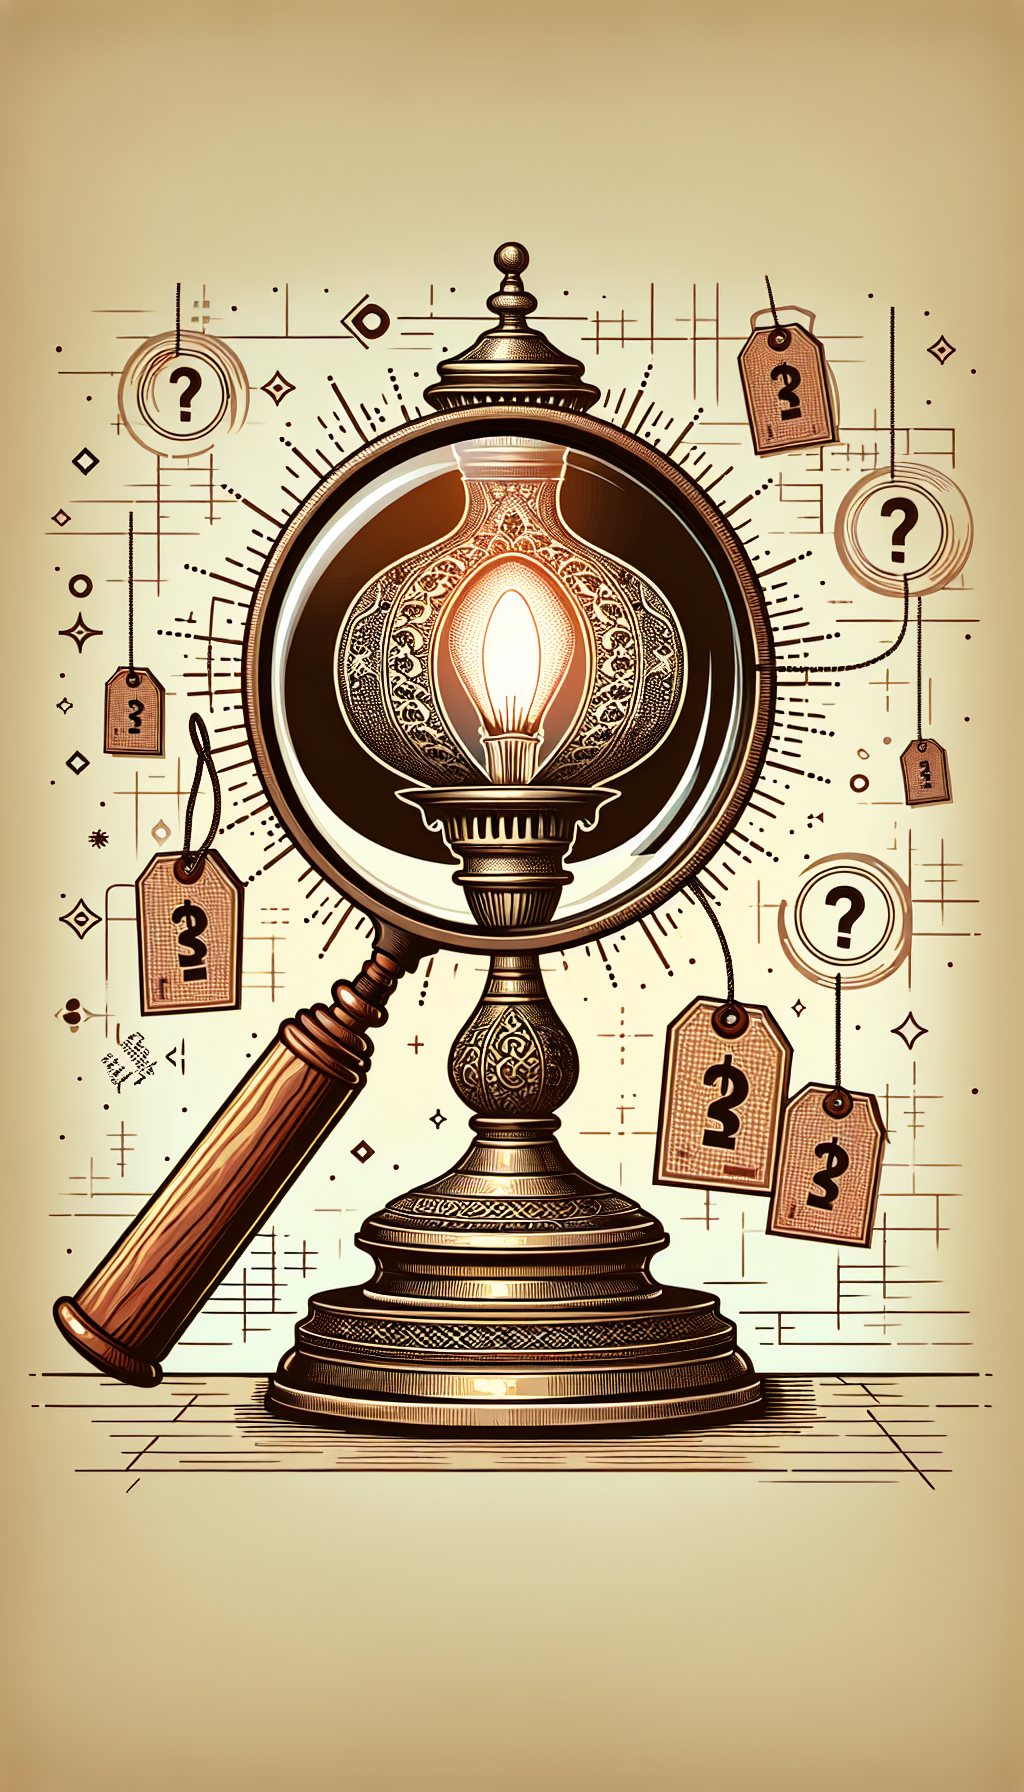 An illustration depicting a magnifying glass highlighting specific features on an intricately designed antique electric hurricane lamp, with symbols like authenticity ticks and question marks floating around it. The lamp sits atop a pedestal with price tags showing increasing values, subtly hinting at its worth. Image format: 4:3.